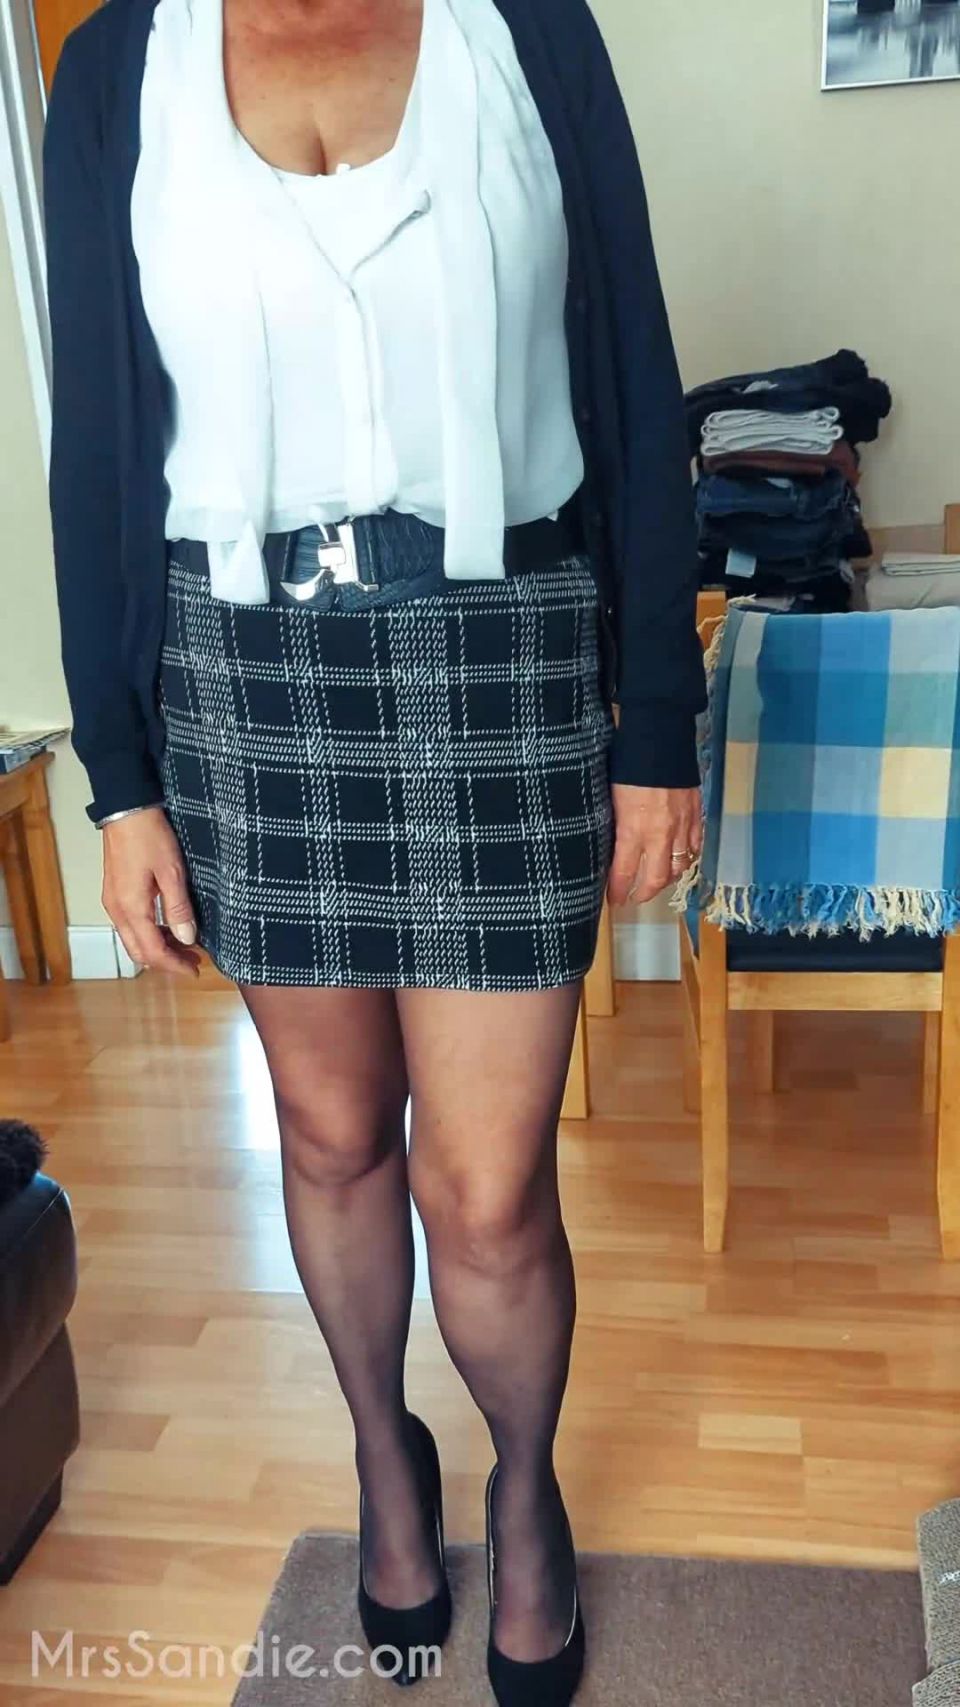 Mrs Sandie Mrssandie - id like to know if any of you cum to my middle aged bare legs xx 28-05-2022